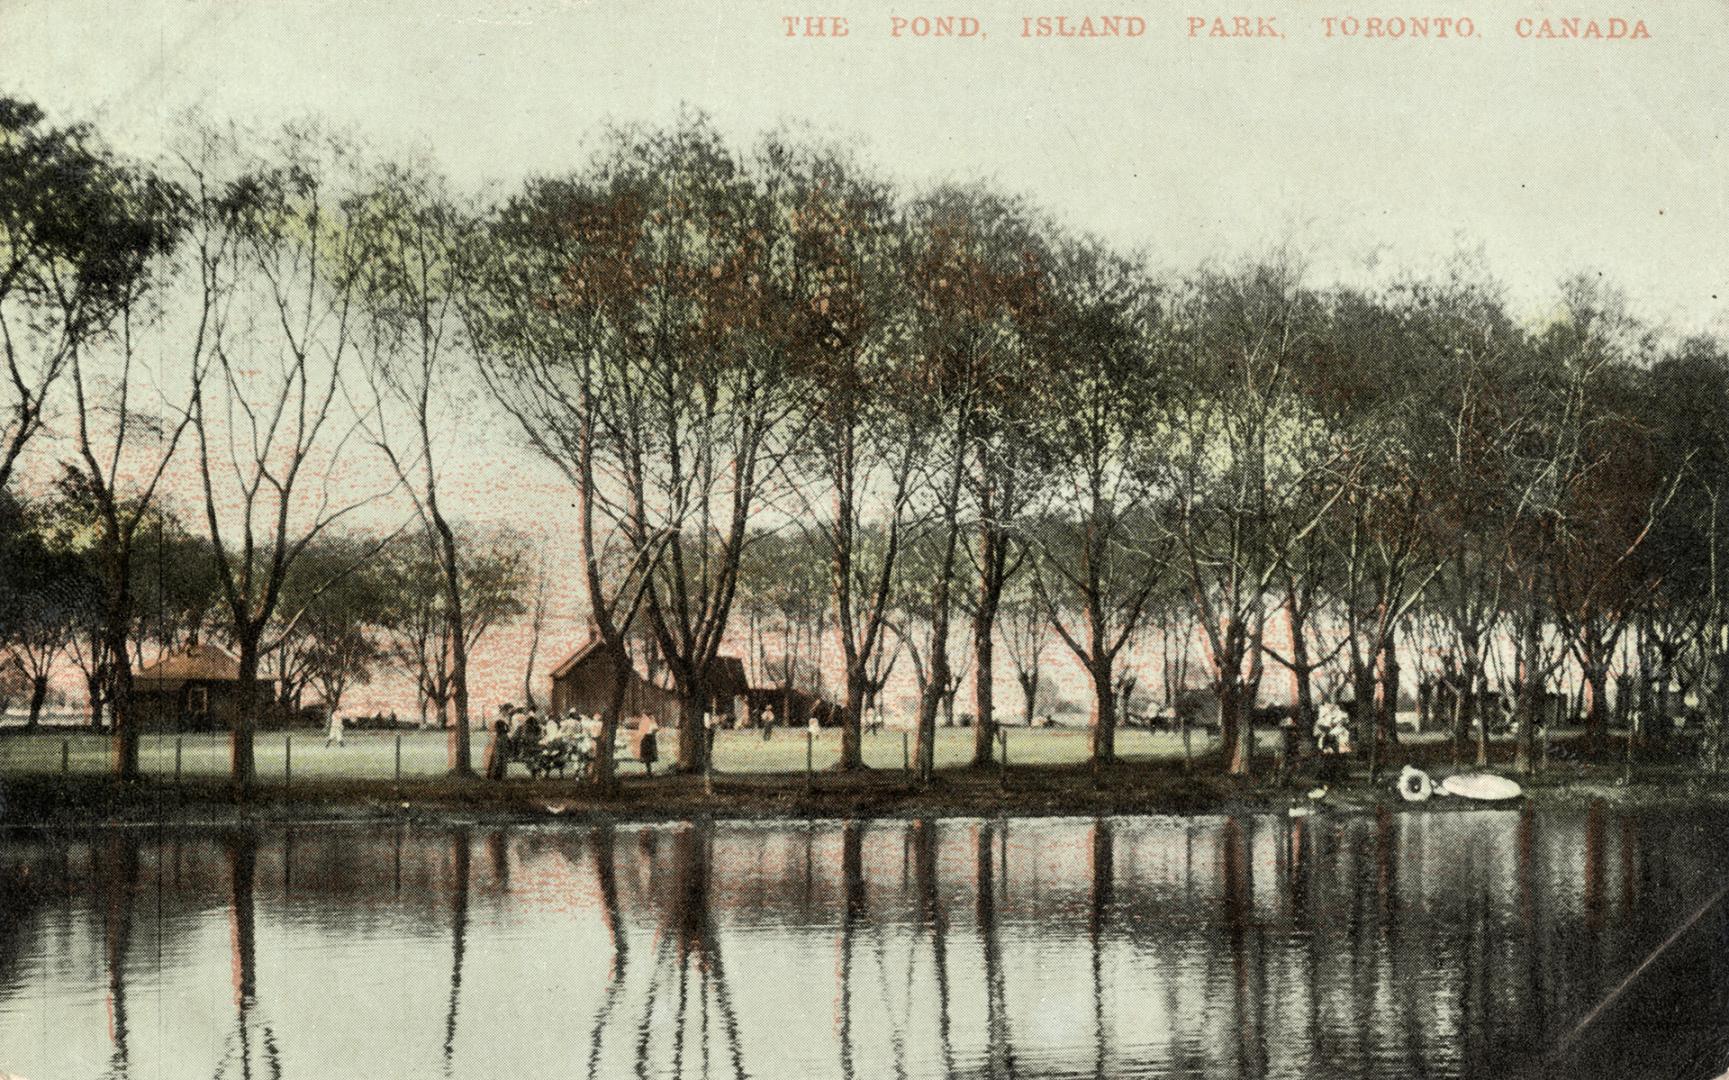 View of trees and buildings and people reflected in a large pond. 